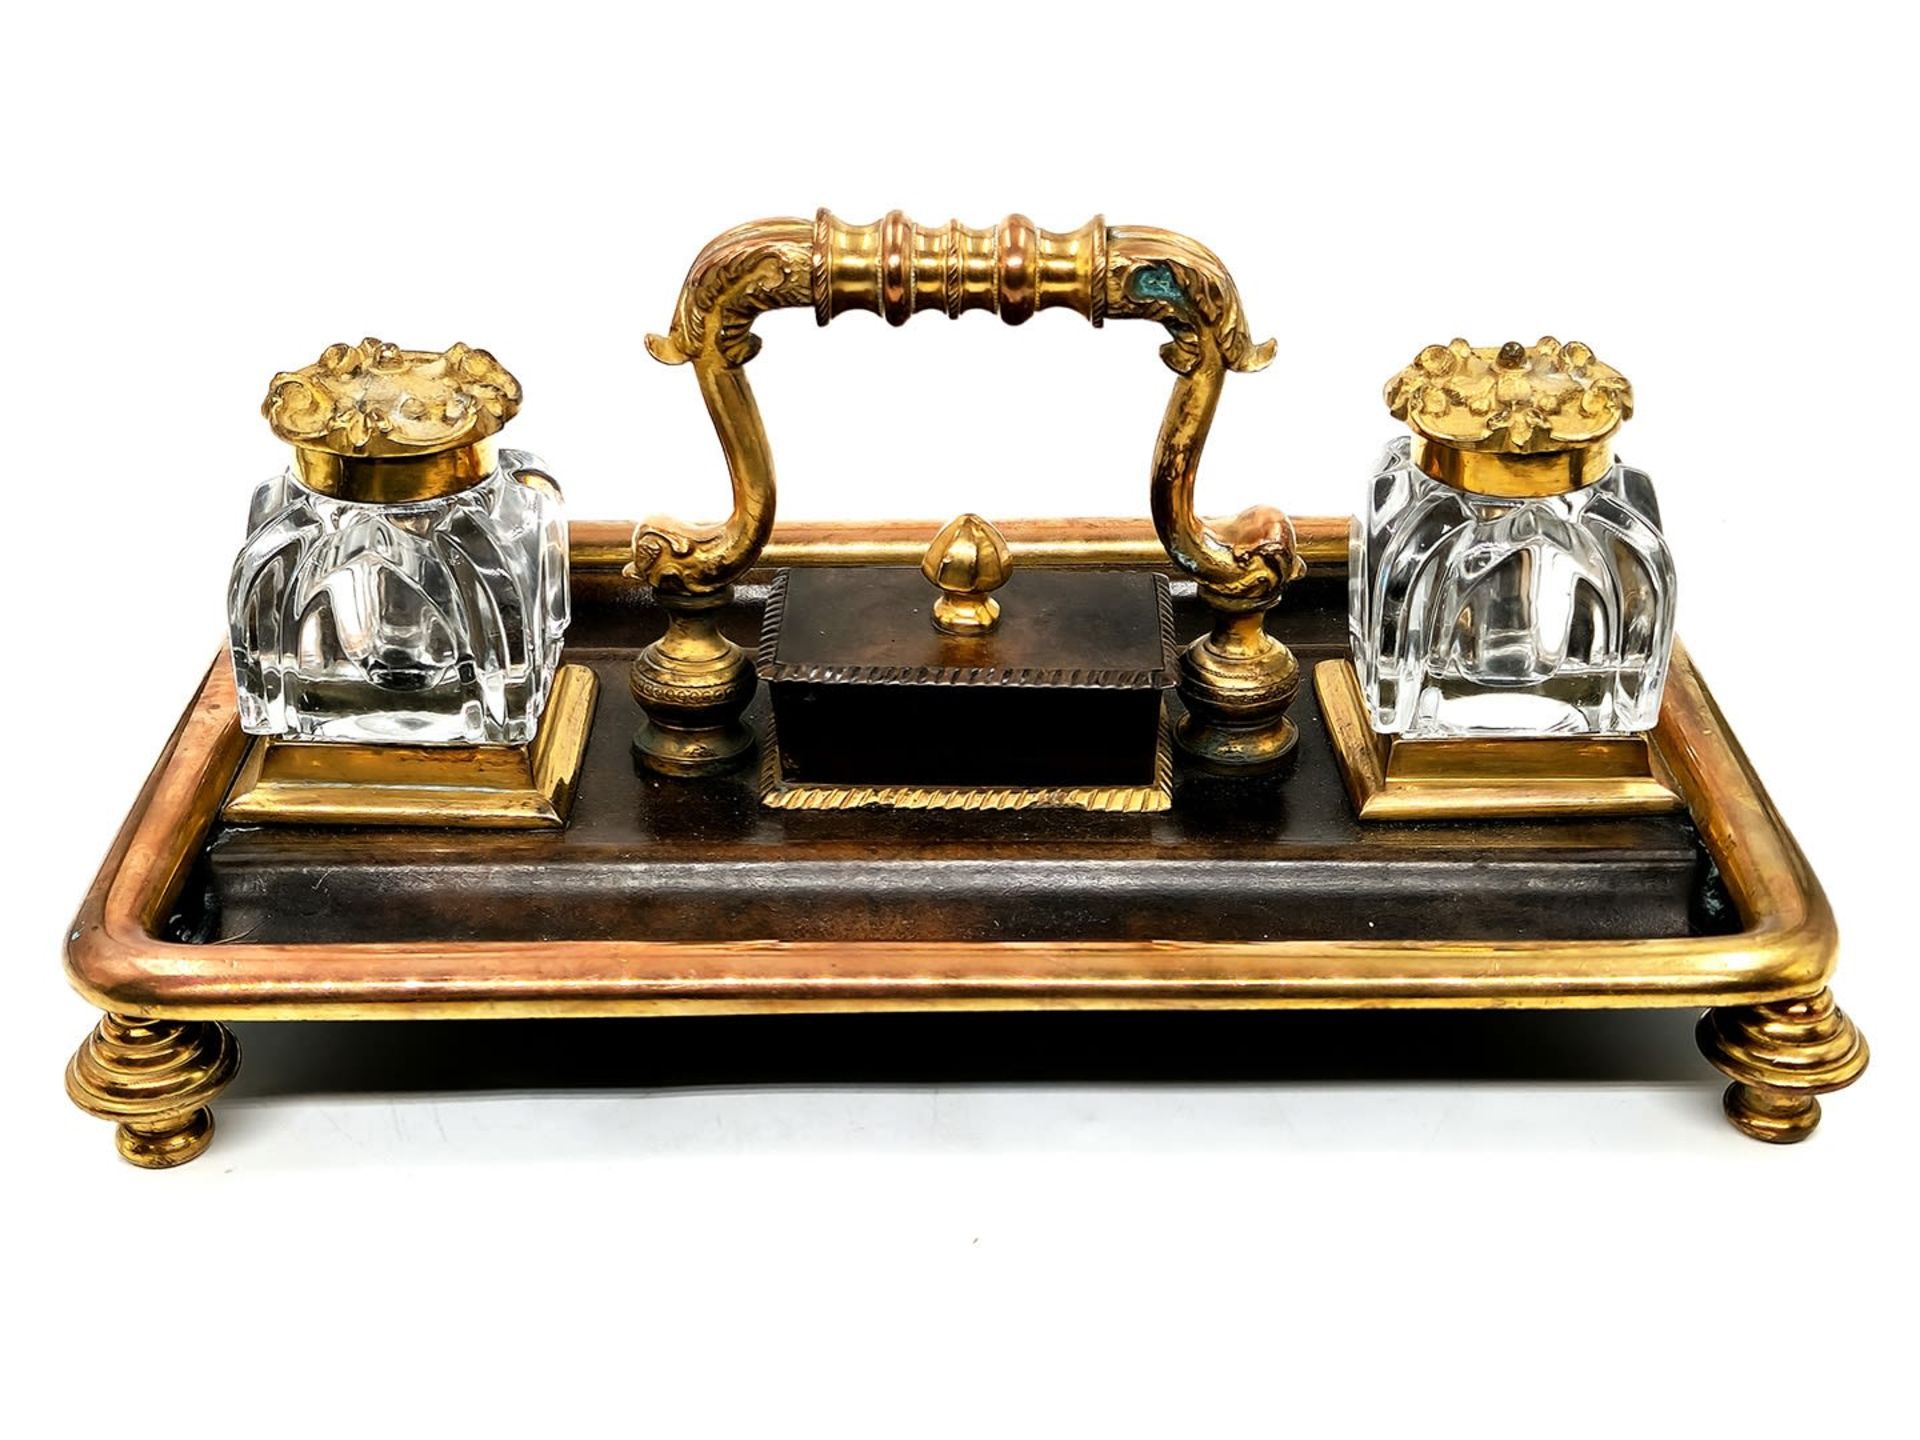 An antique double tabletop inkwell, brass and spelter, the ink wells themselves are made of glass, - Bild 4 aus 7